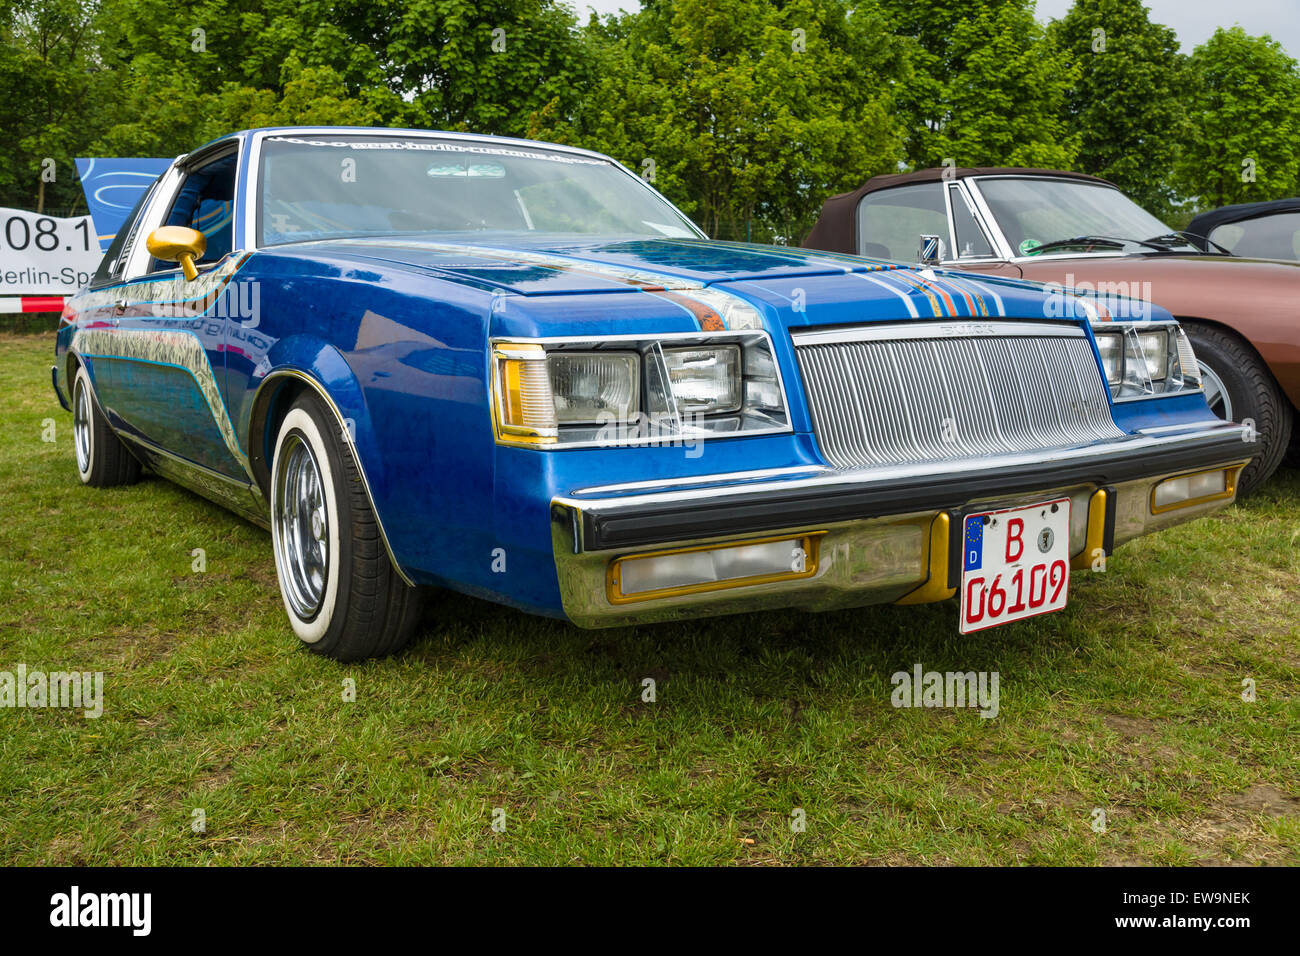 Buick regal hi-res stock photography and images - Alamy